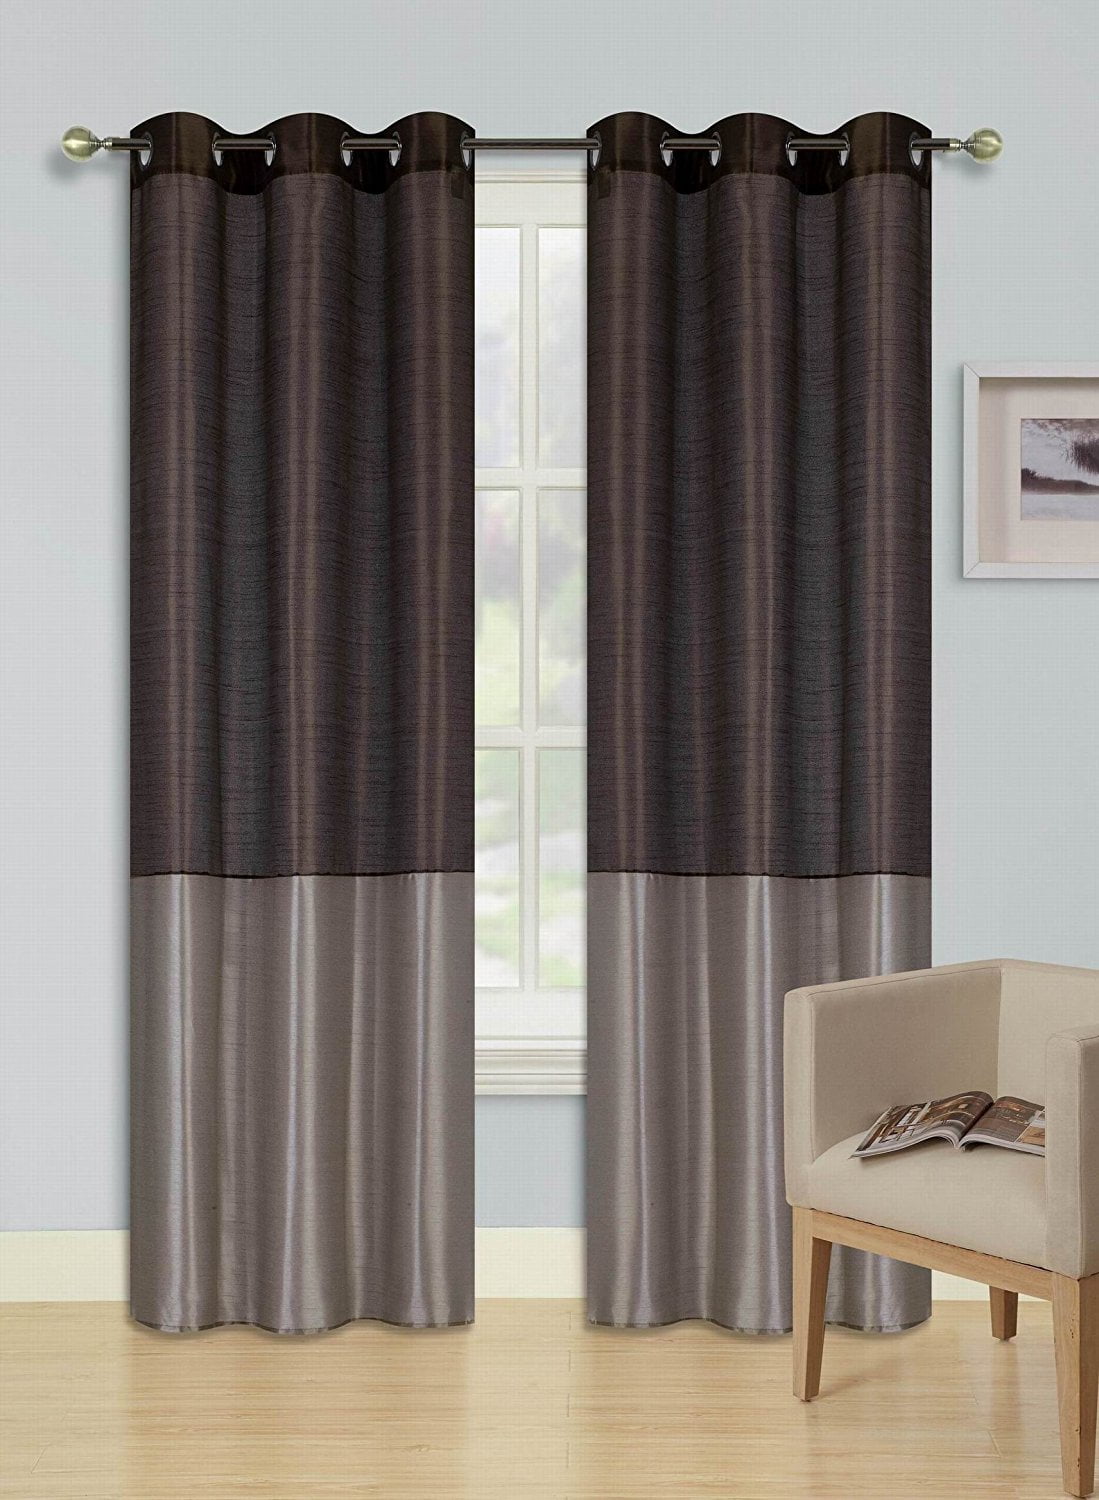 1 SILKY 2 TONE SOLID GROMMET FAUX SILK WINDOW CURTAIN PANEL HEIDI TAUPE BROWN 